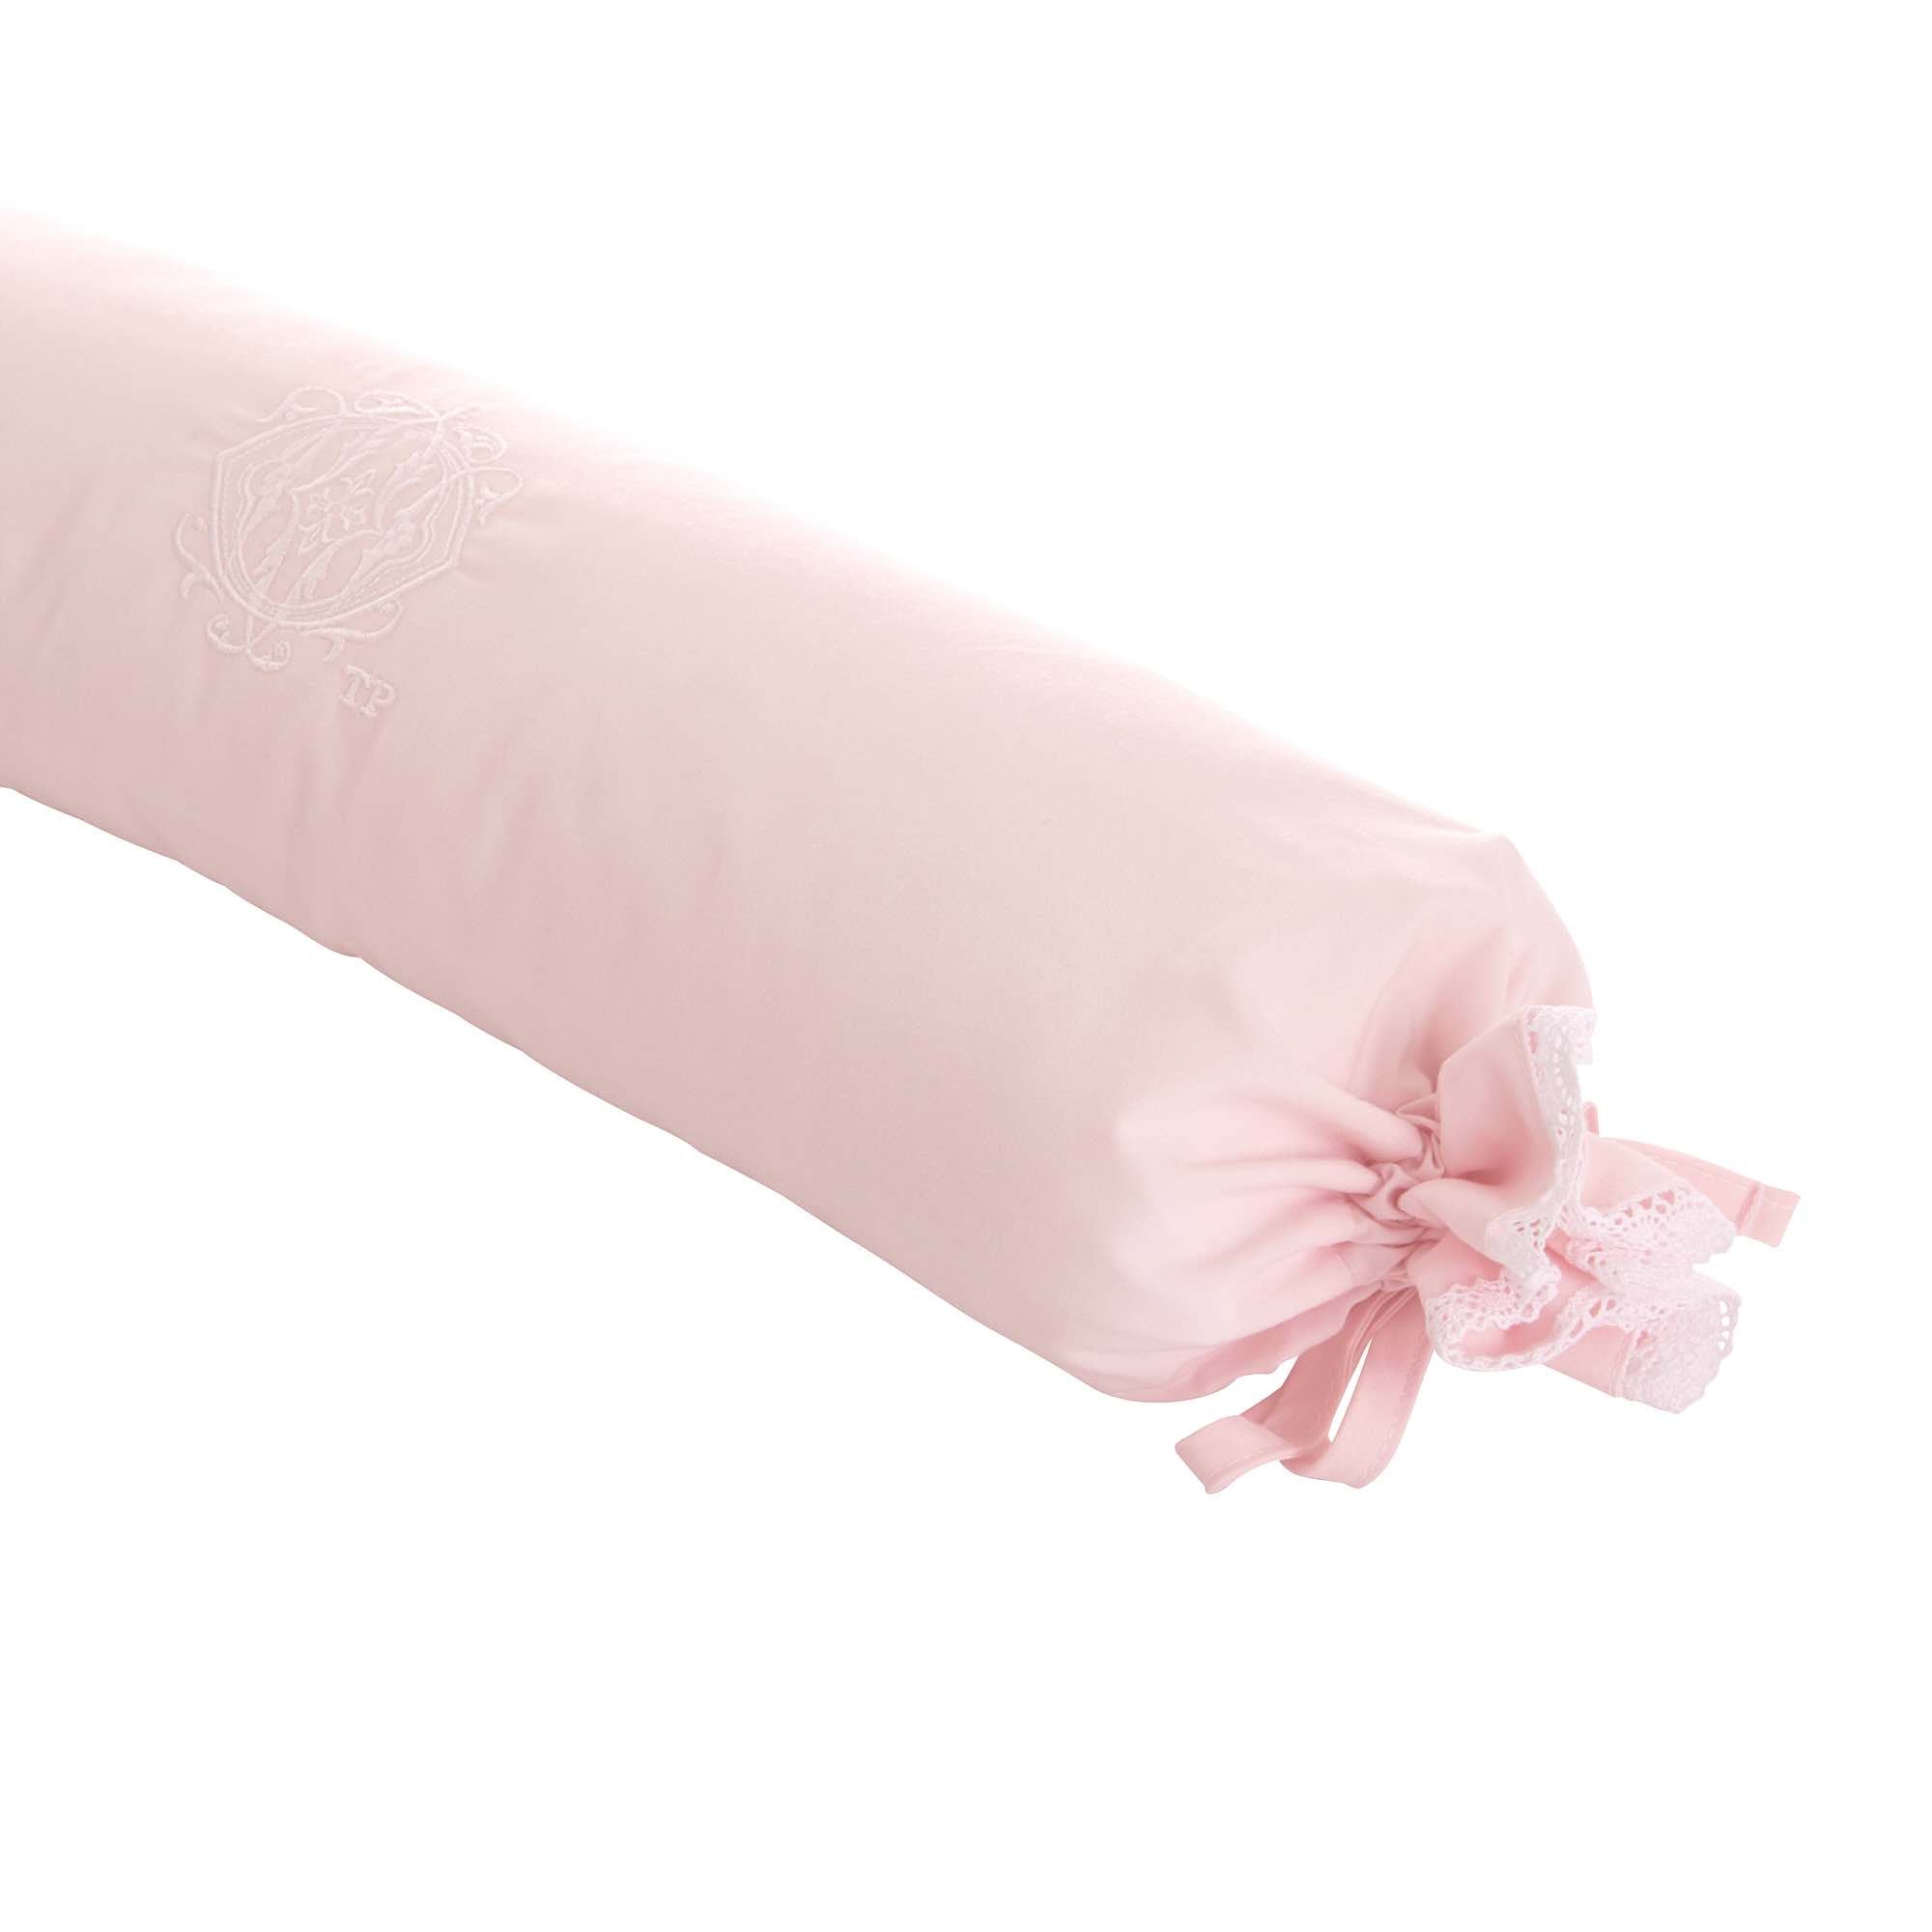 Theophile & Patachou Baby Roll Cushion - Royal Pink